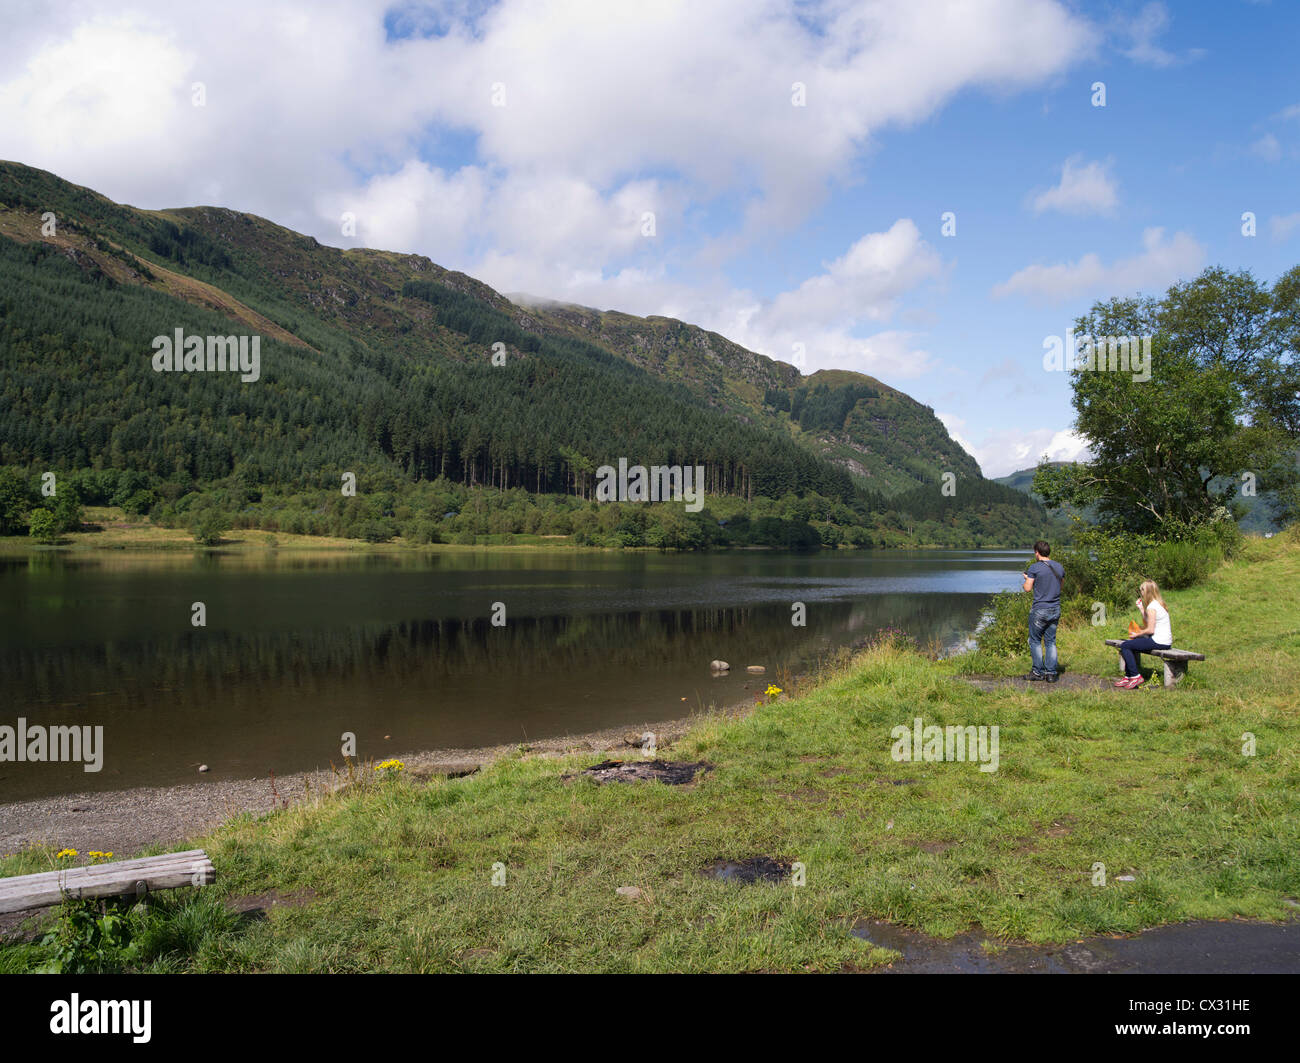 dh Loch Lubnaig STRATHYRE STIRLINGSHIRE Tourist couple TrossachS national highlands park scenic lochside summer lochs holiday in scotland countryside Stock Photo